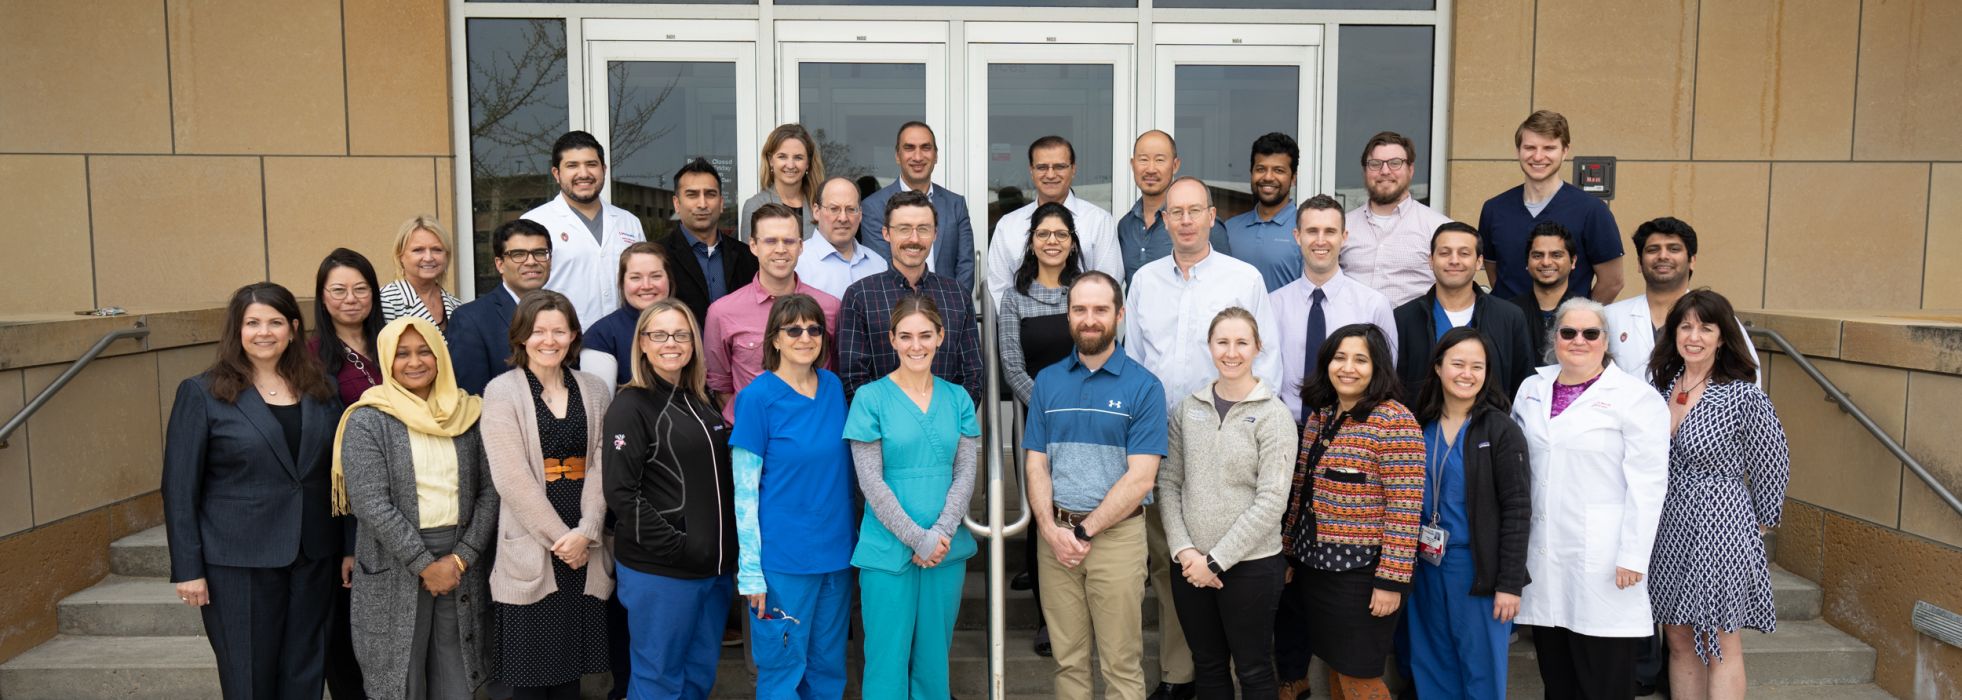 Division of Nephrology faculty group photo